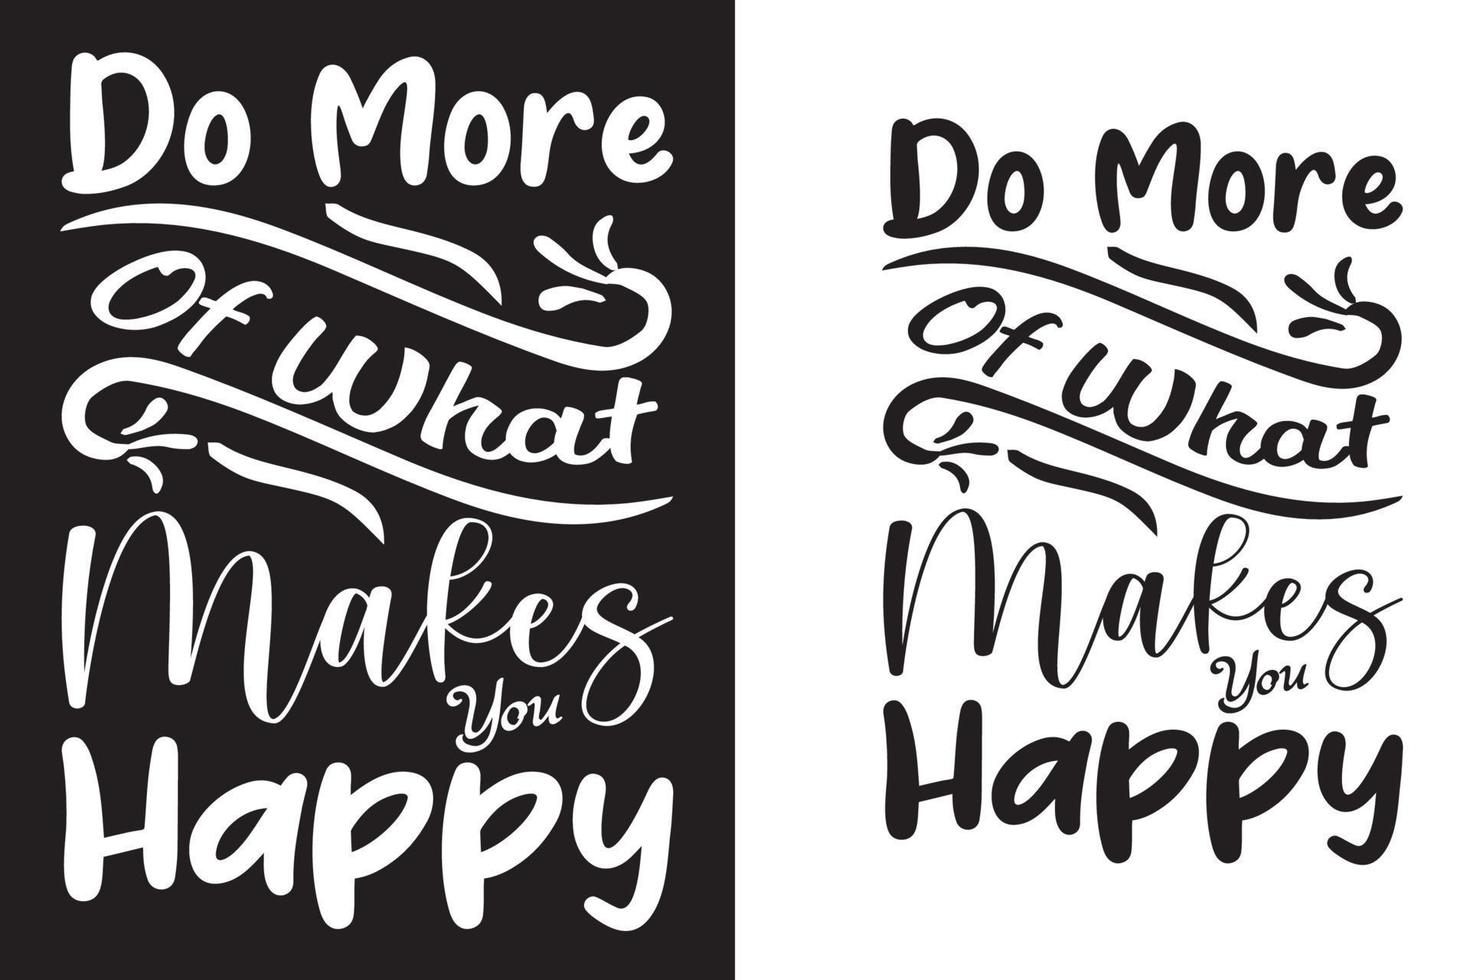 Do more of what makes you happy T-shirt. vector